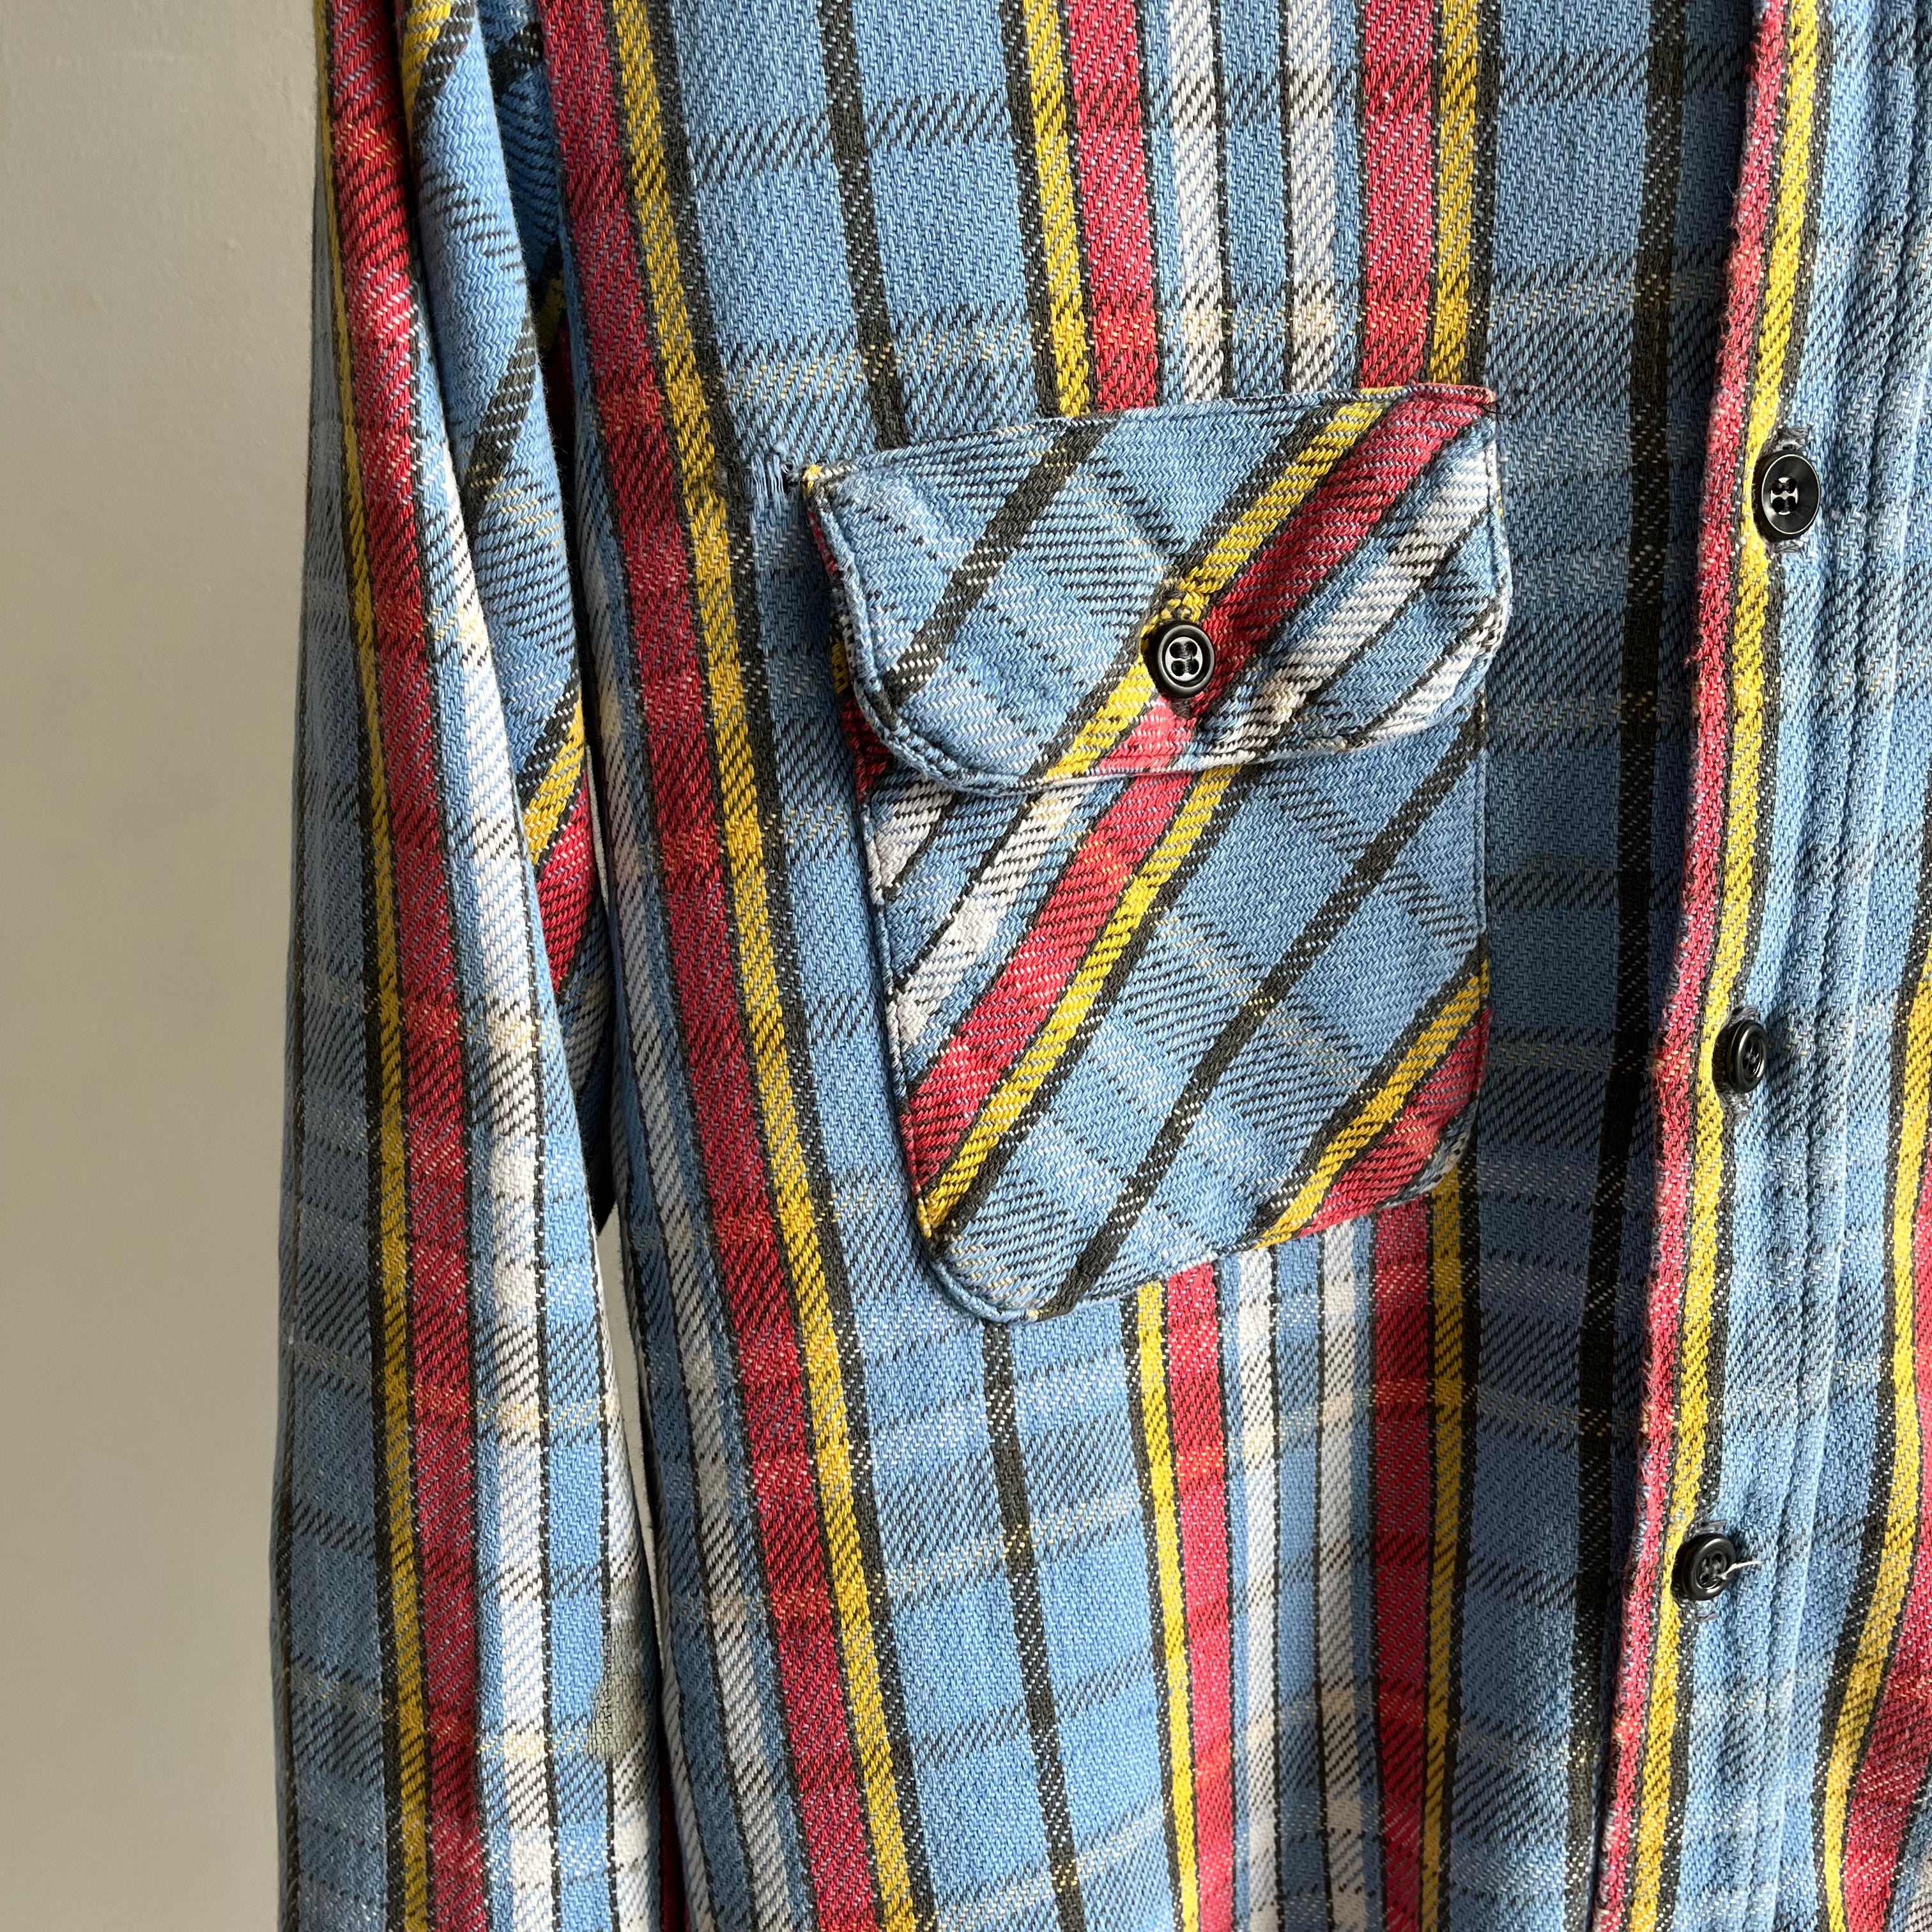 1970/80s Five Brothers XL Cotton Flannel